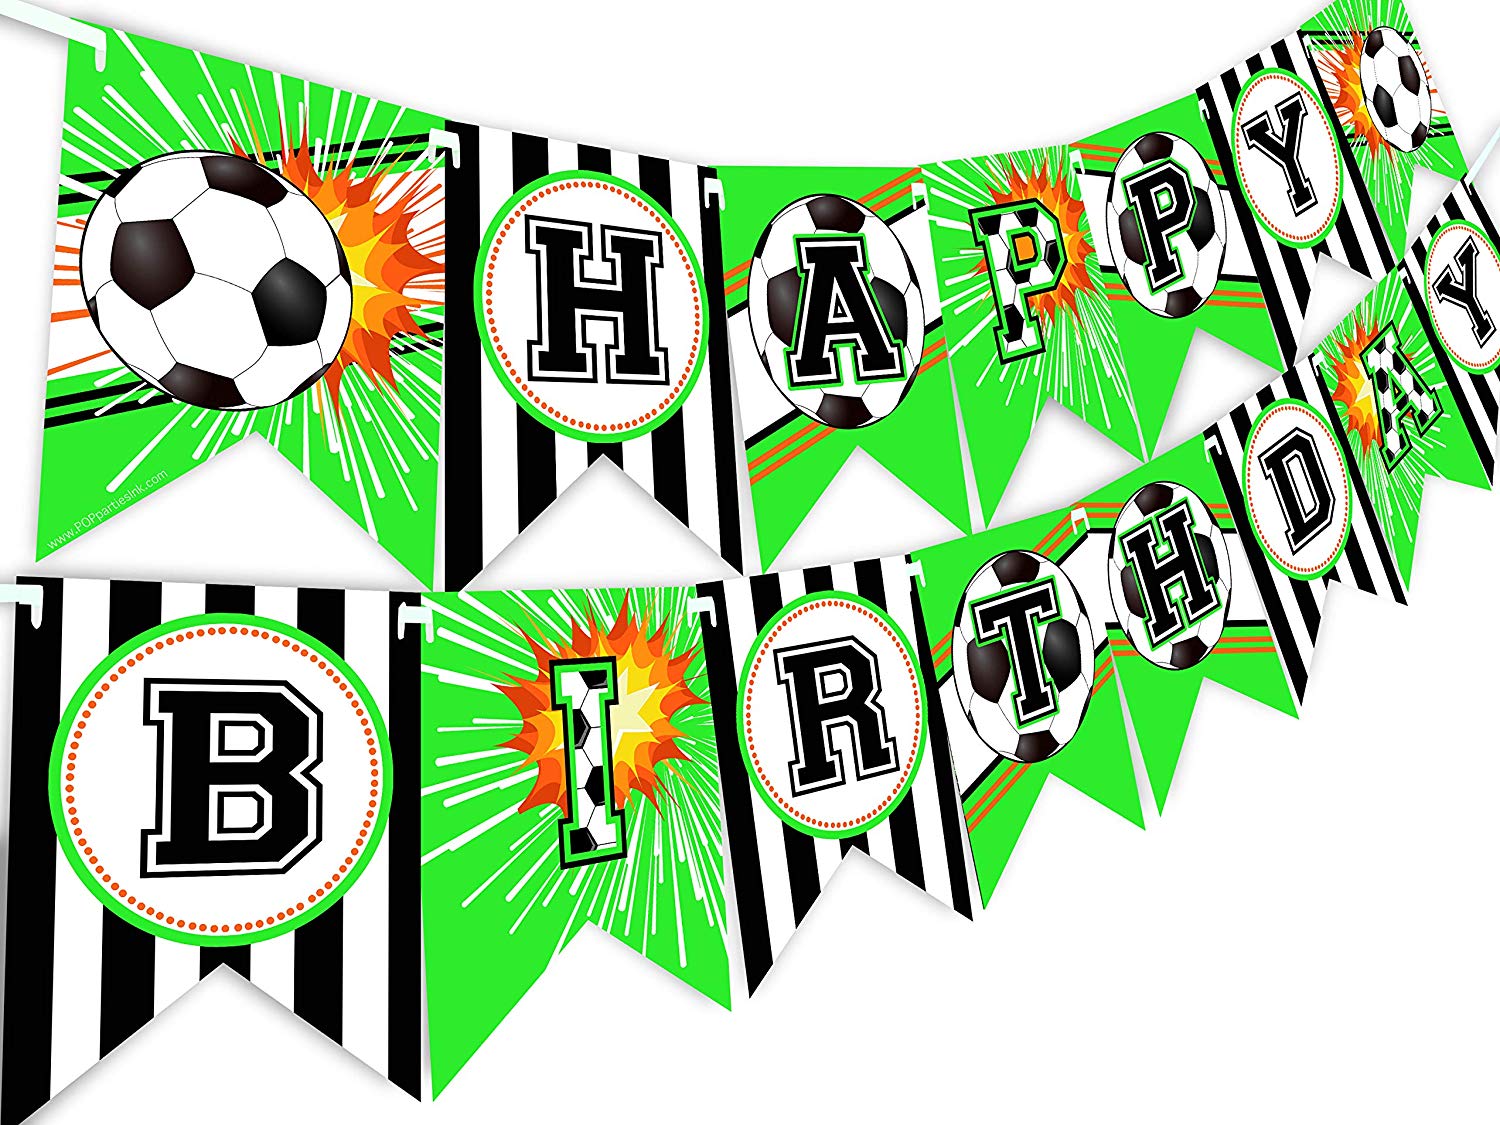 Slime Green Happy Birthday Banner Pennant - Slime Party Decorations - Art Party Supplies - Slime Party Supplies - Green